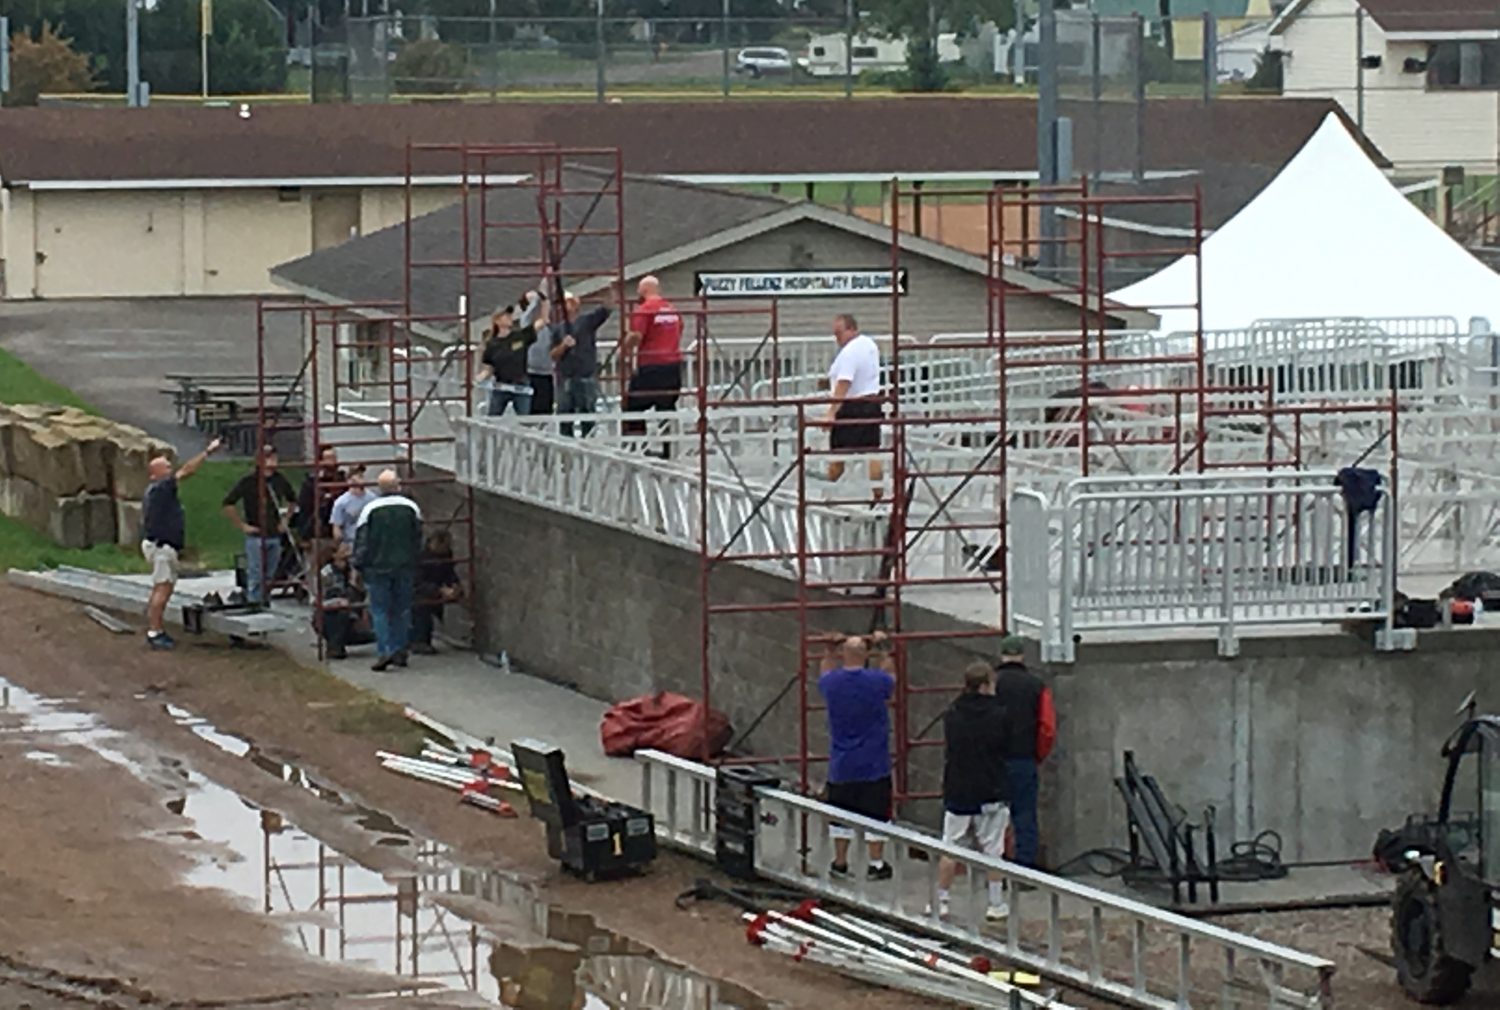 Crew raise the stage in preparation for this year’s Central Wisconsin State Fair grandstand entertainment.